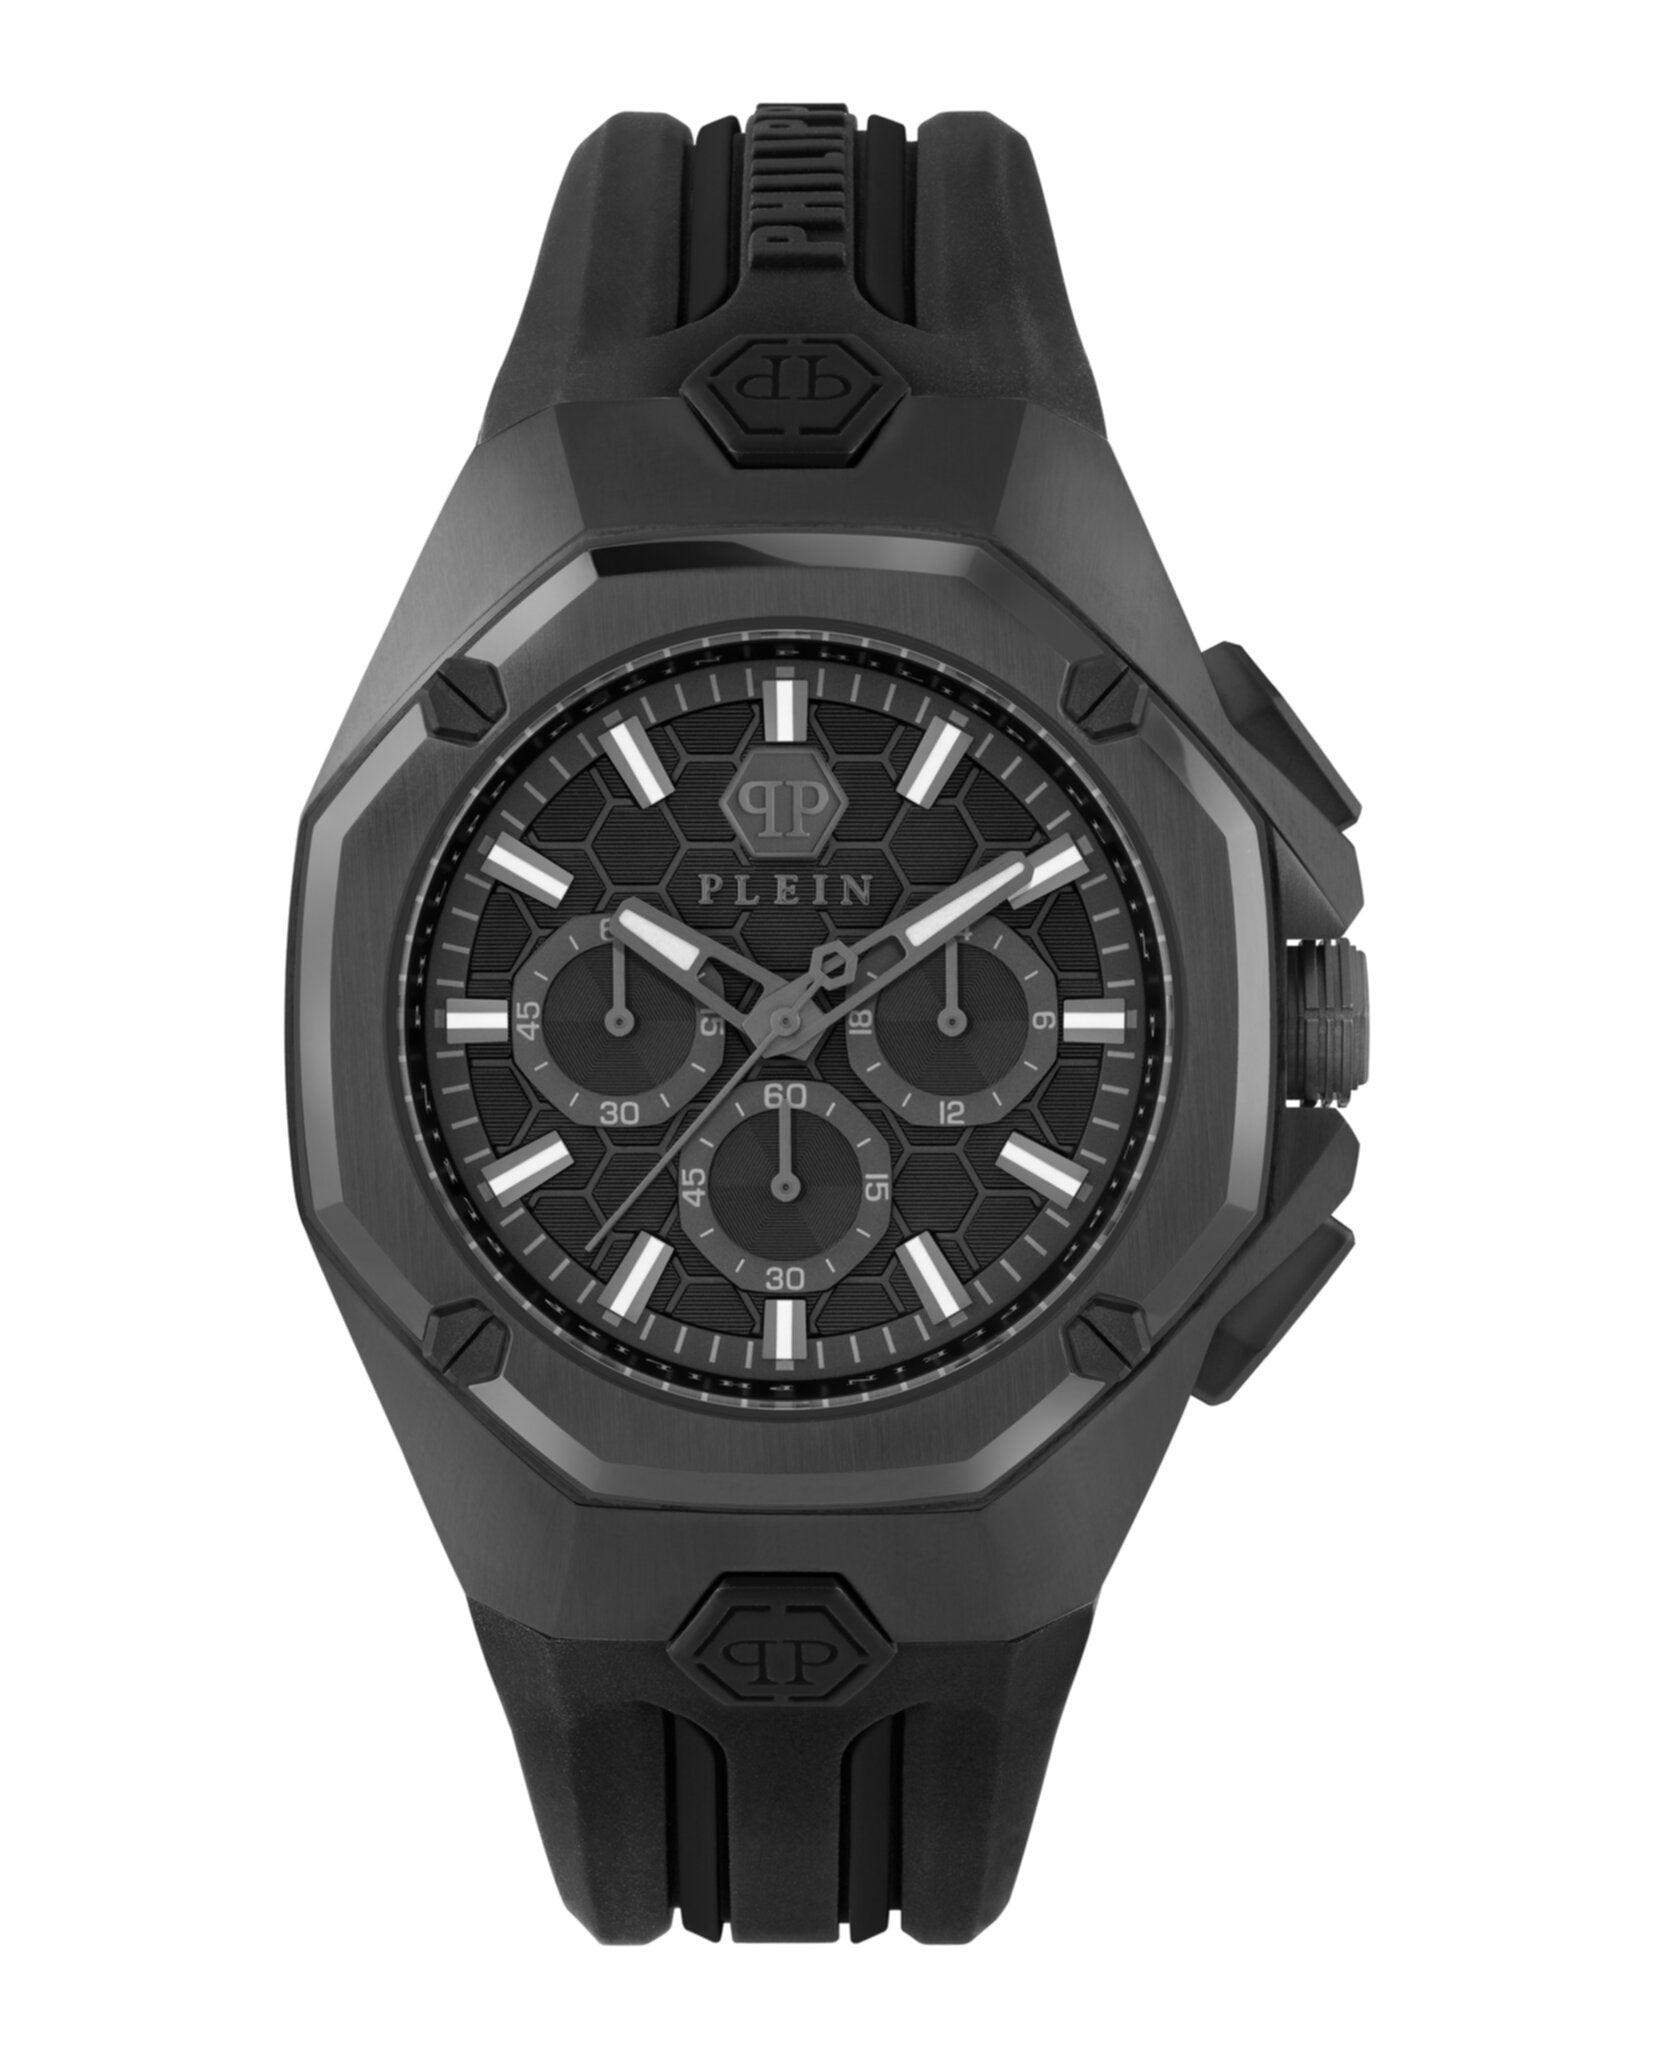 Philipp Plein Mens Octagon Watches | MadaLuxe Time – Madaluxe Time